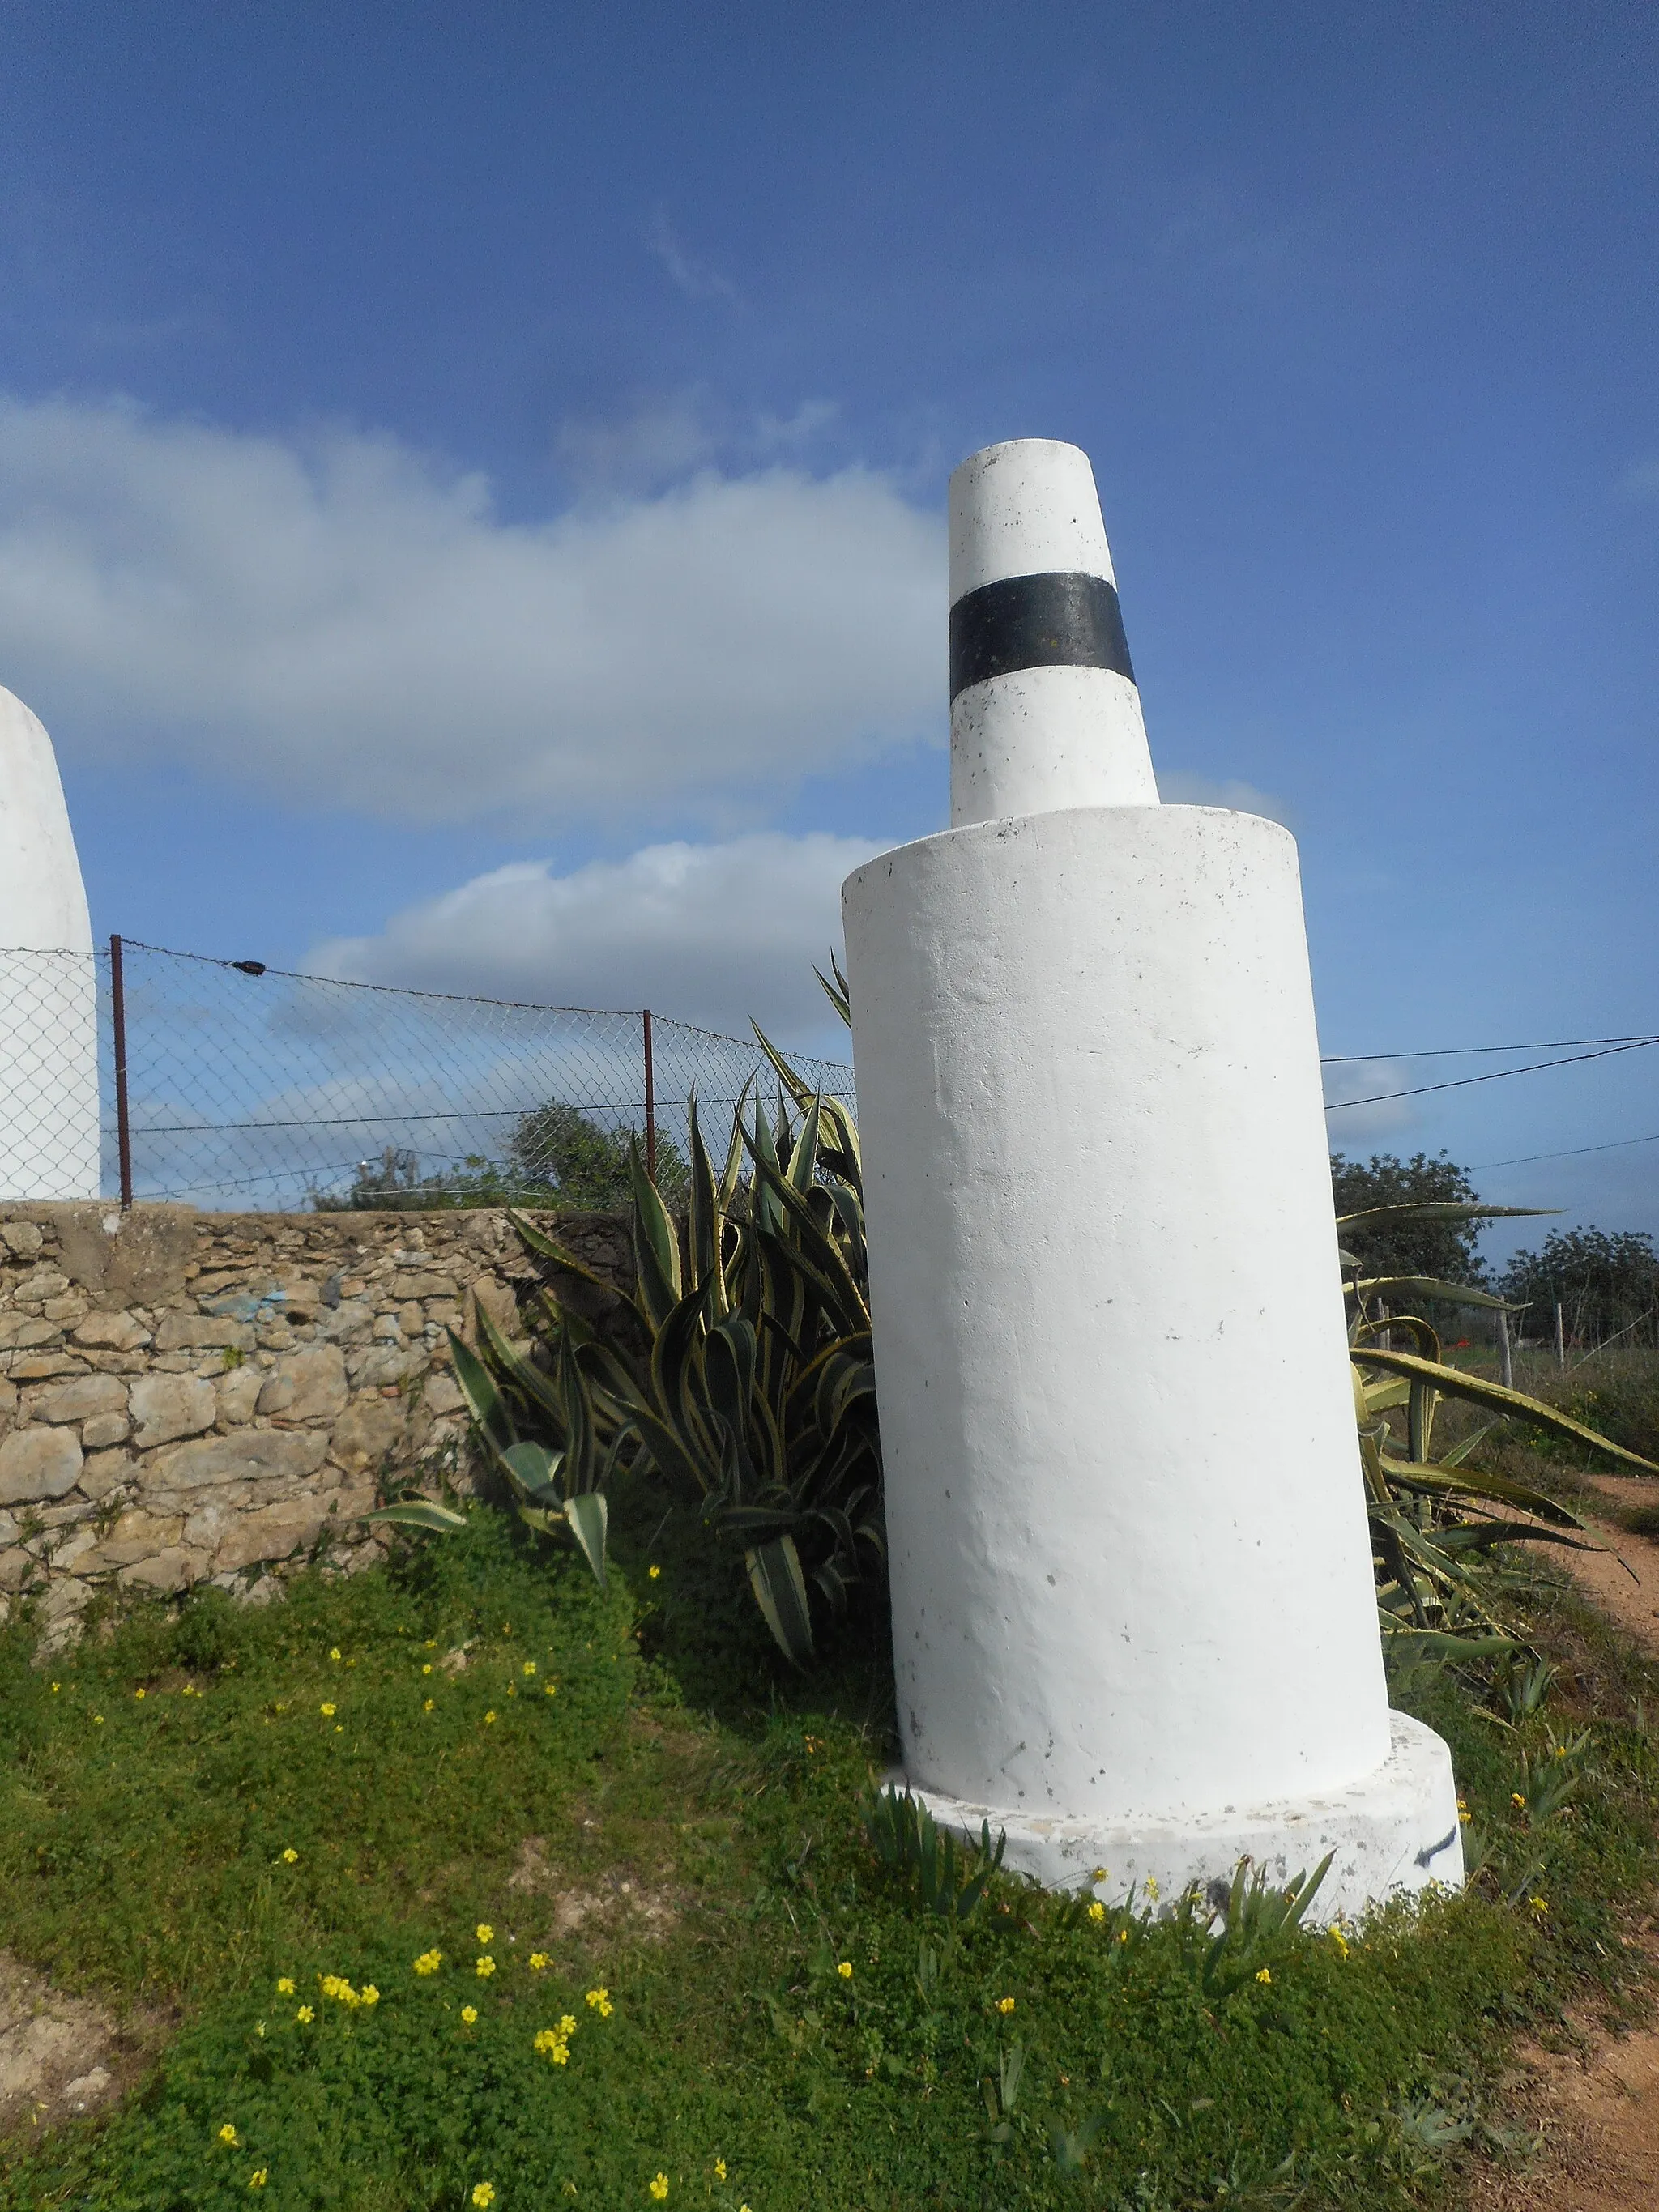 Photo showing: Trig point (Geodetic Point) near the Picota Windmill (Moinho Picota), located on the crown of a hill in the small village of Picota near the town of Loulé, Algarve, Portugal.